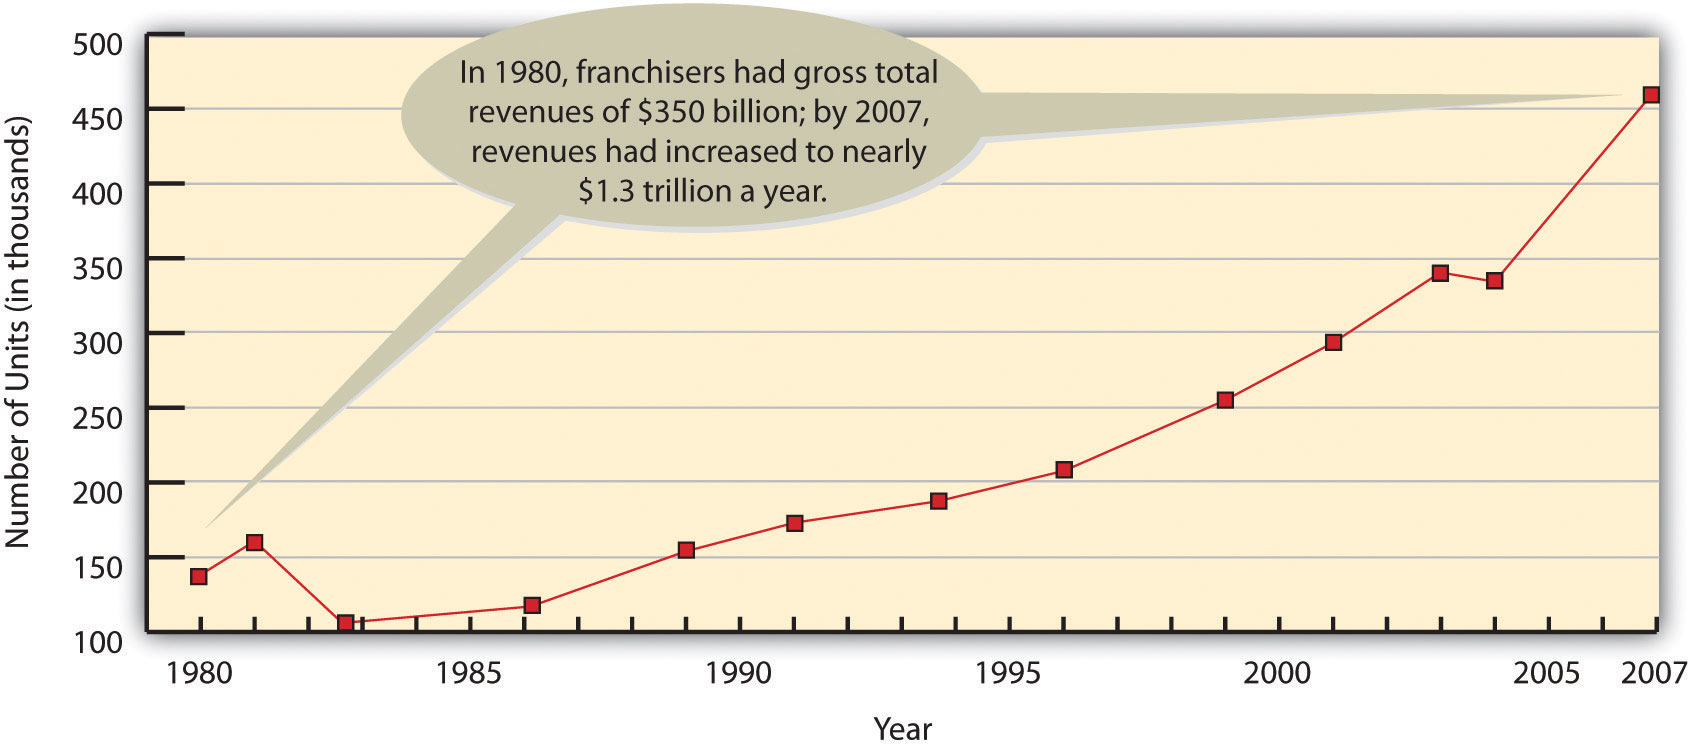 The Growth of Franchising, 1980-2007: In 1980, franchisers had gross total revenues of $350 billion; by 2007, revenues had increased to nearly $1.3 trillion a year.